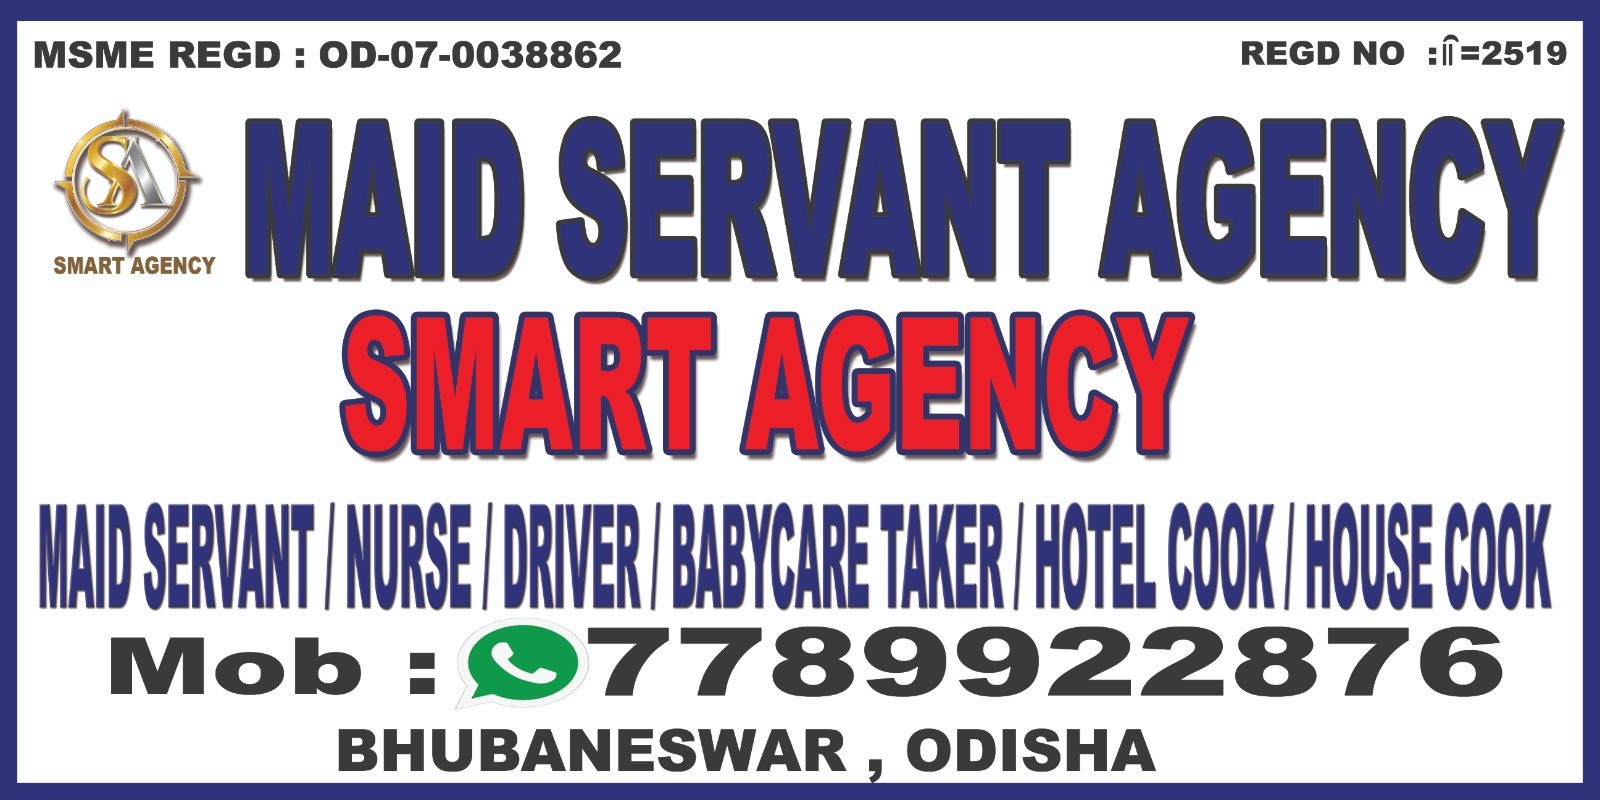 Maid/ Domestic help, Gardening/ Landscaping, Cooking service, Pet care, Domestic delivery, Elderly Care, Child Care, Driver/ Taxi service, Sanitation services; Exp: 3 year